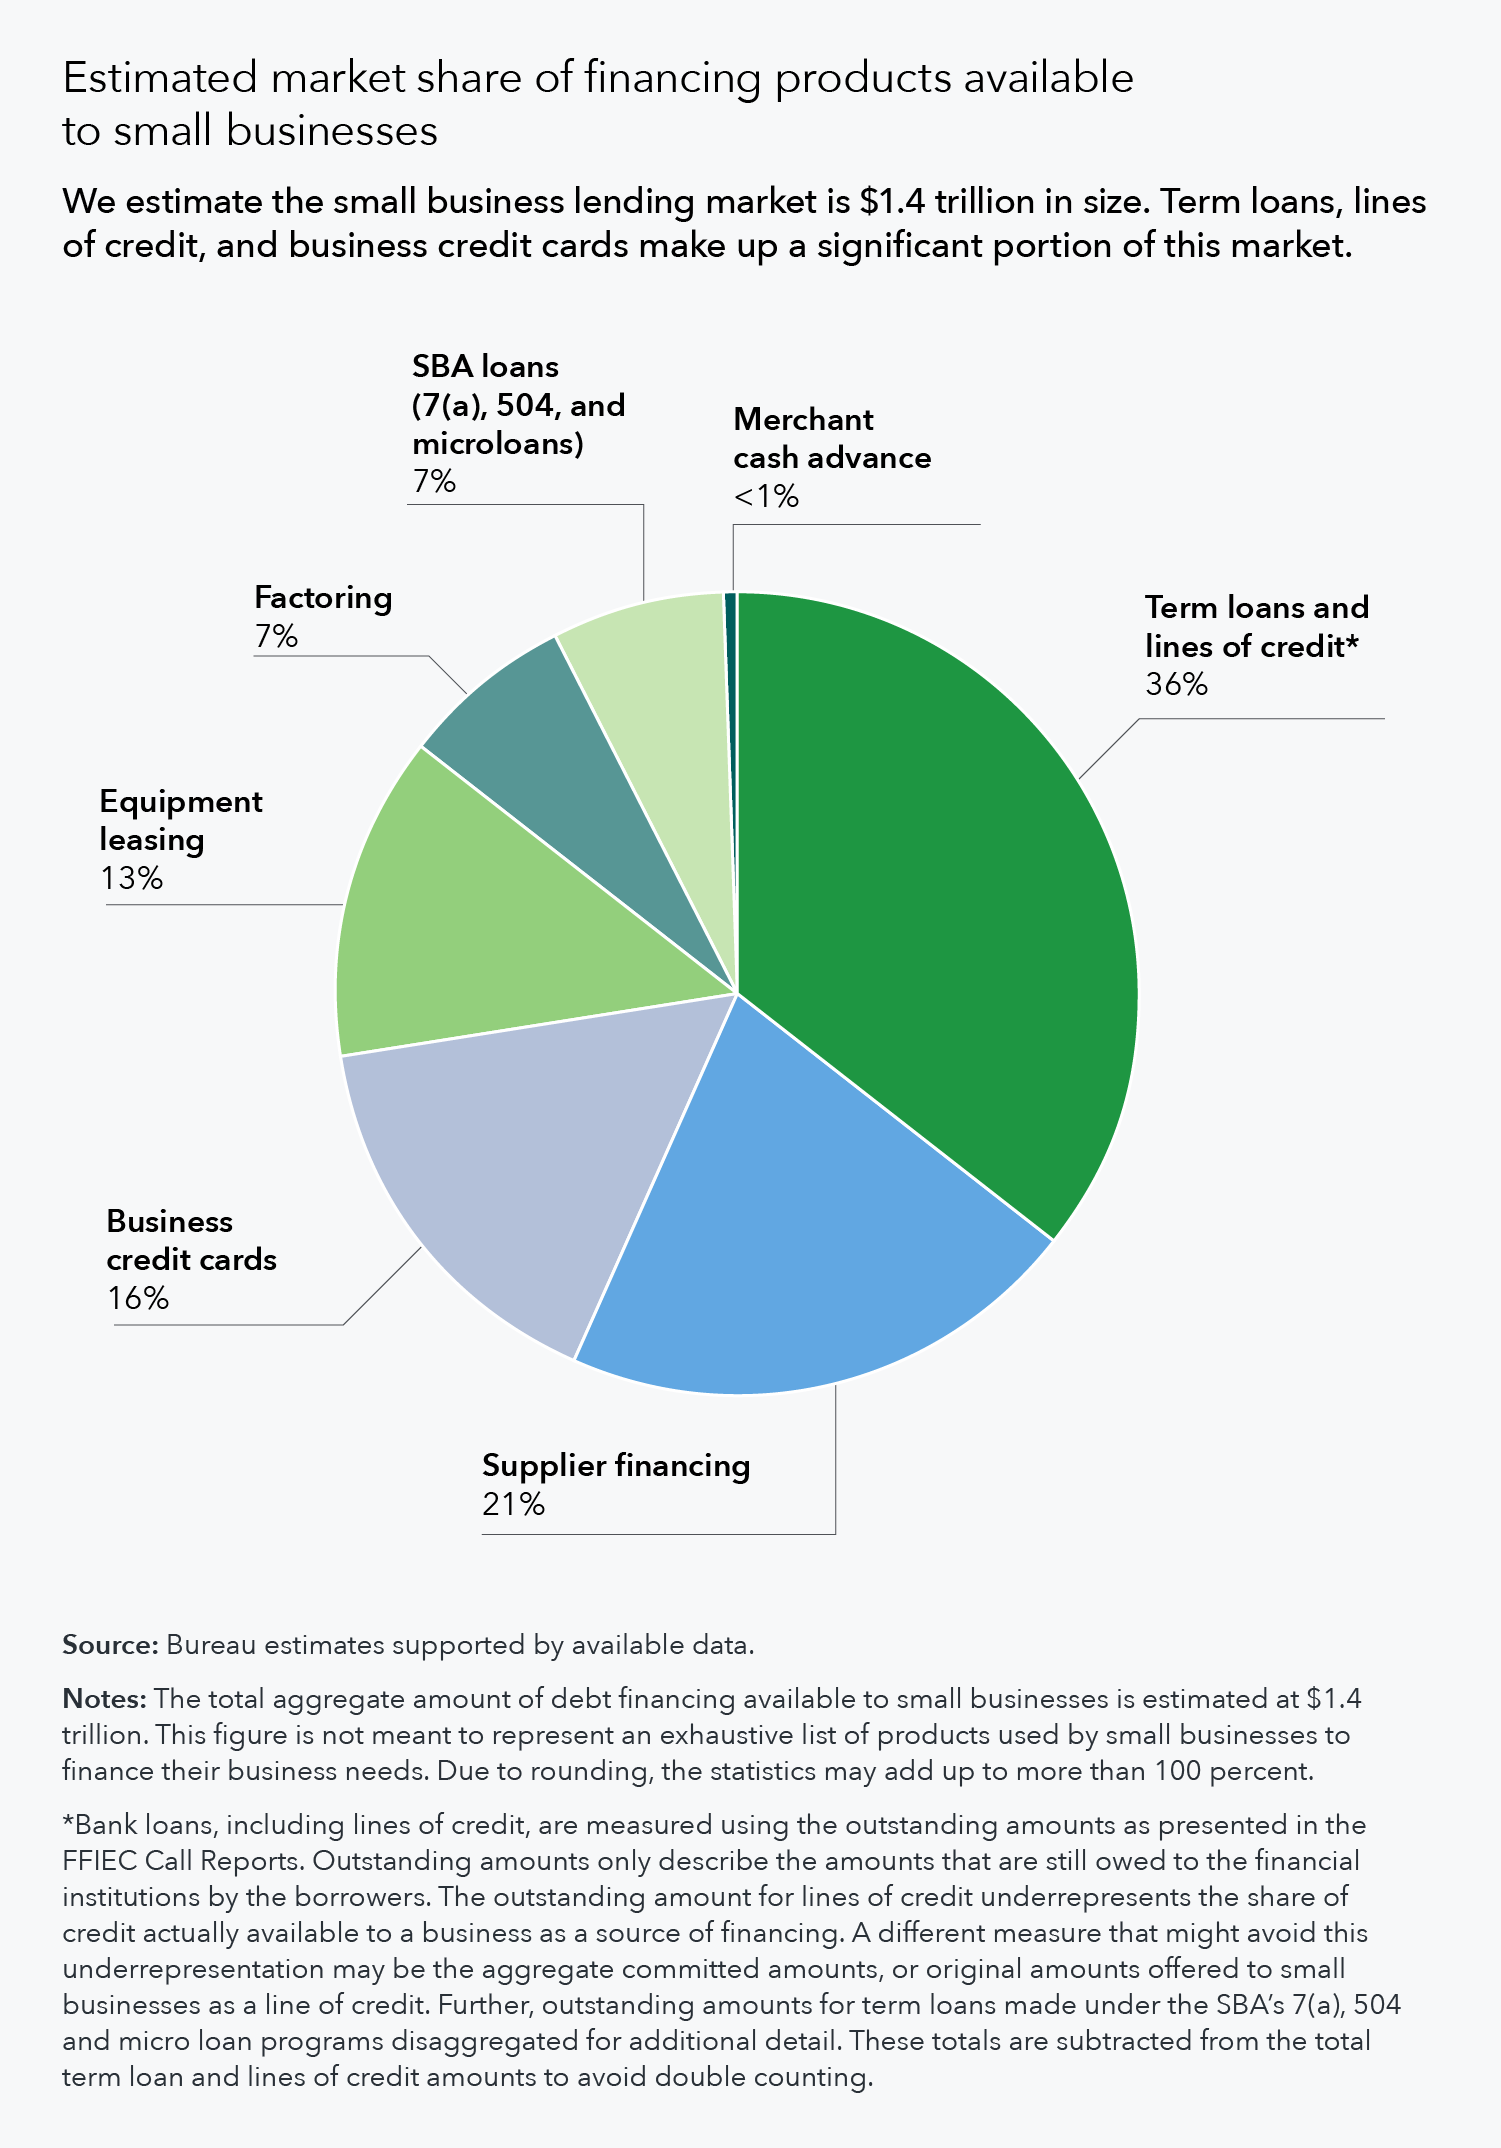 Pie chart of different financing products available to small businesses and their estimated share.